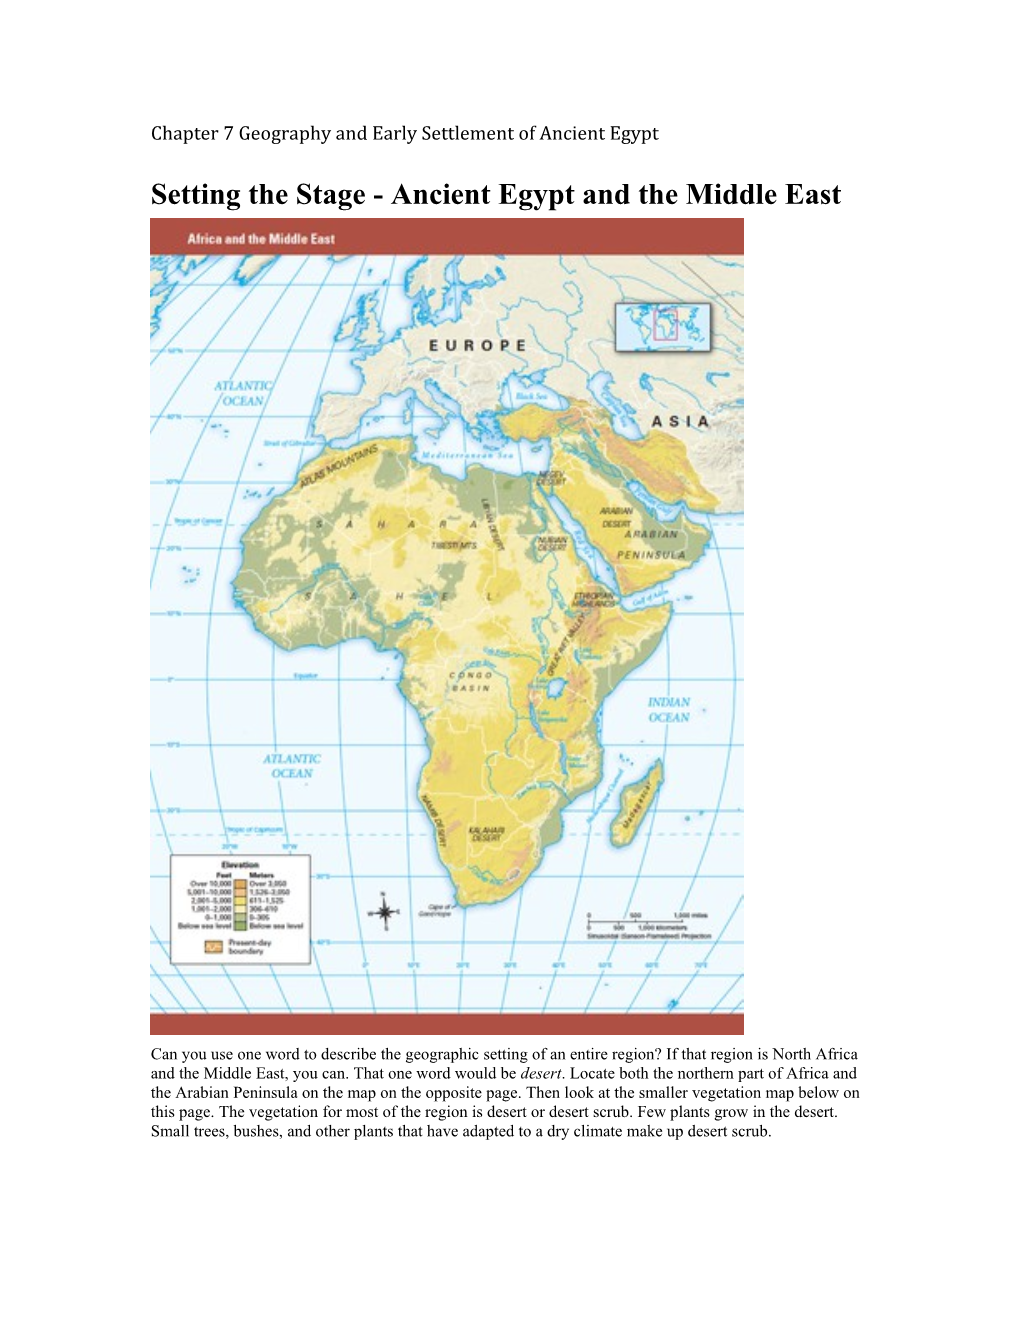 Setting the Stage - Ancient Egypt and the Middle East